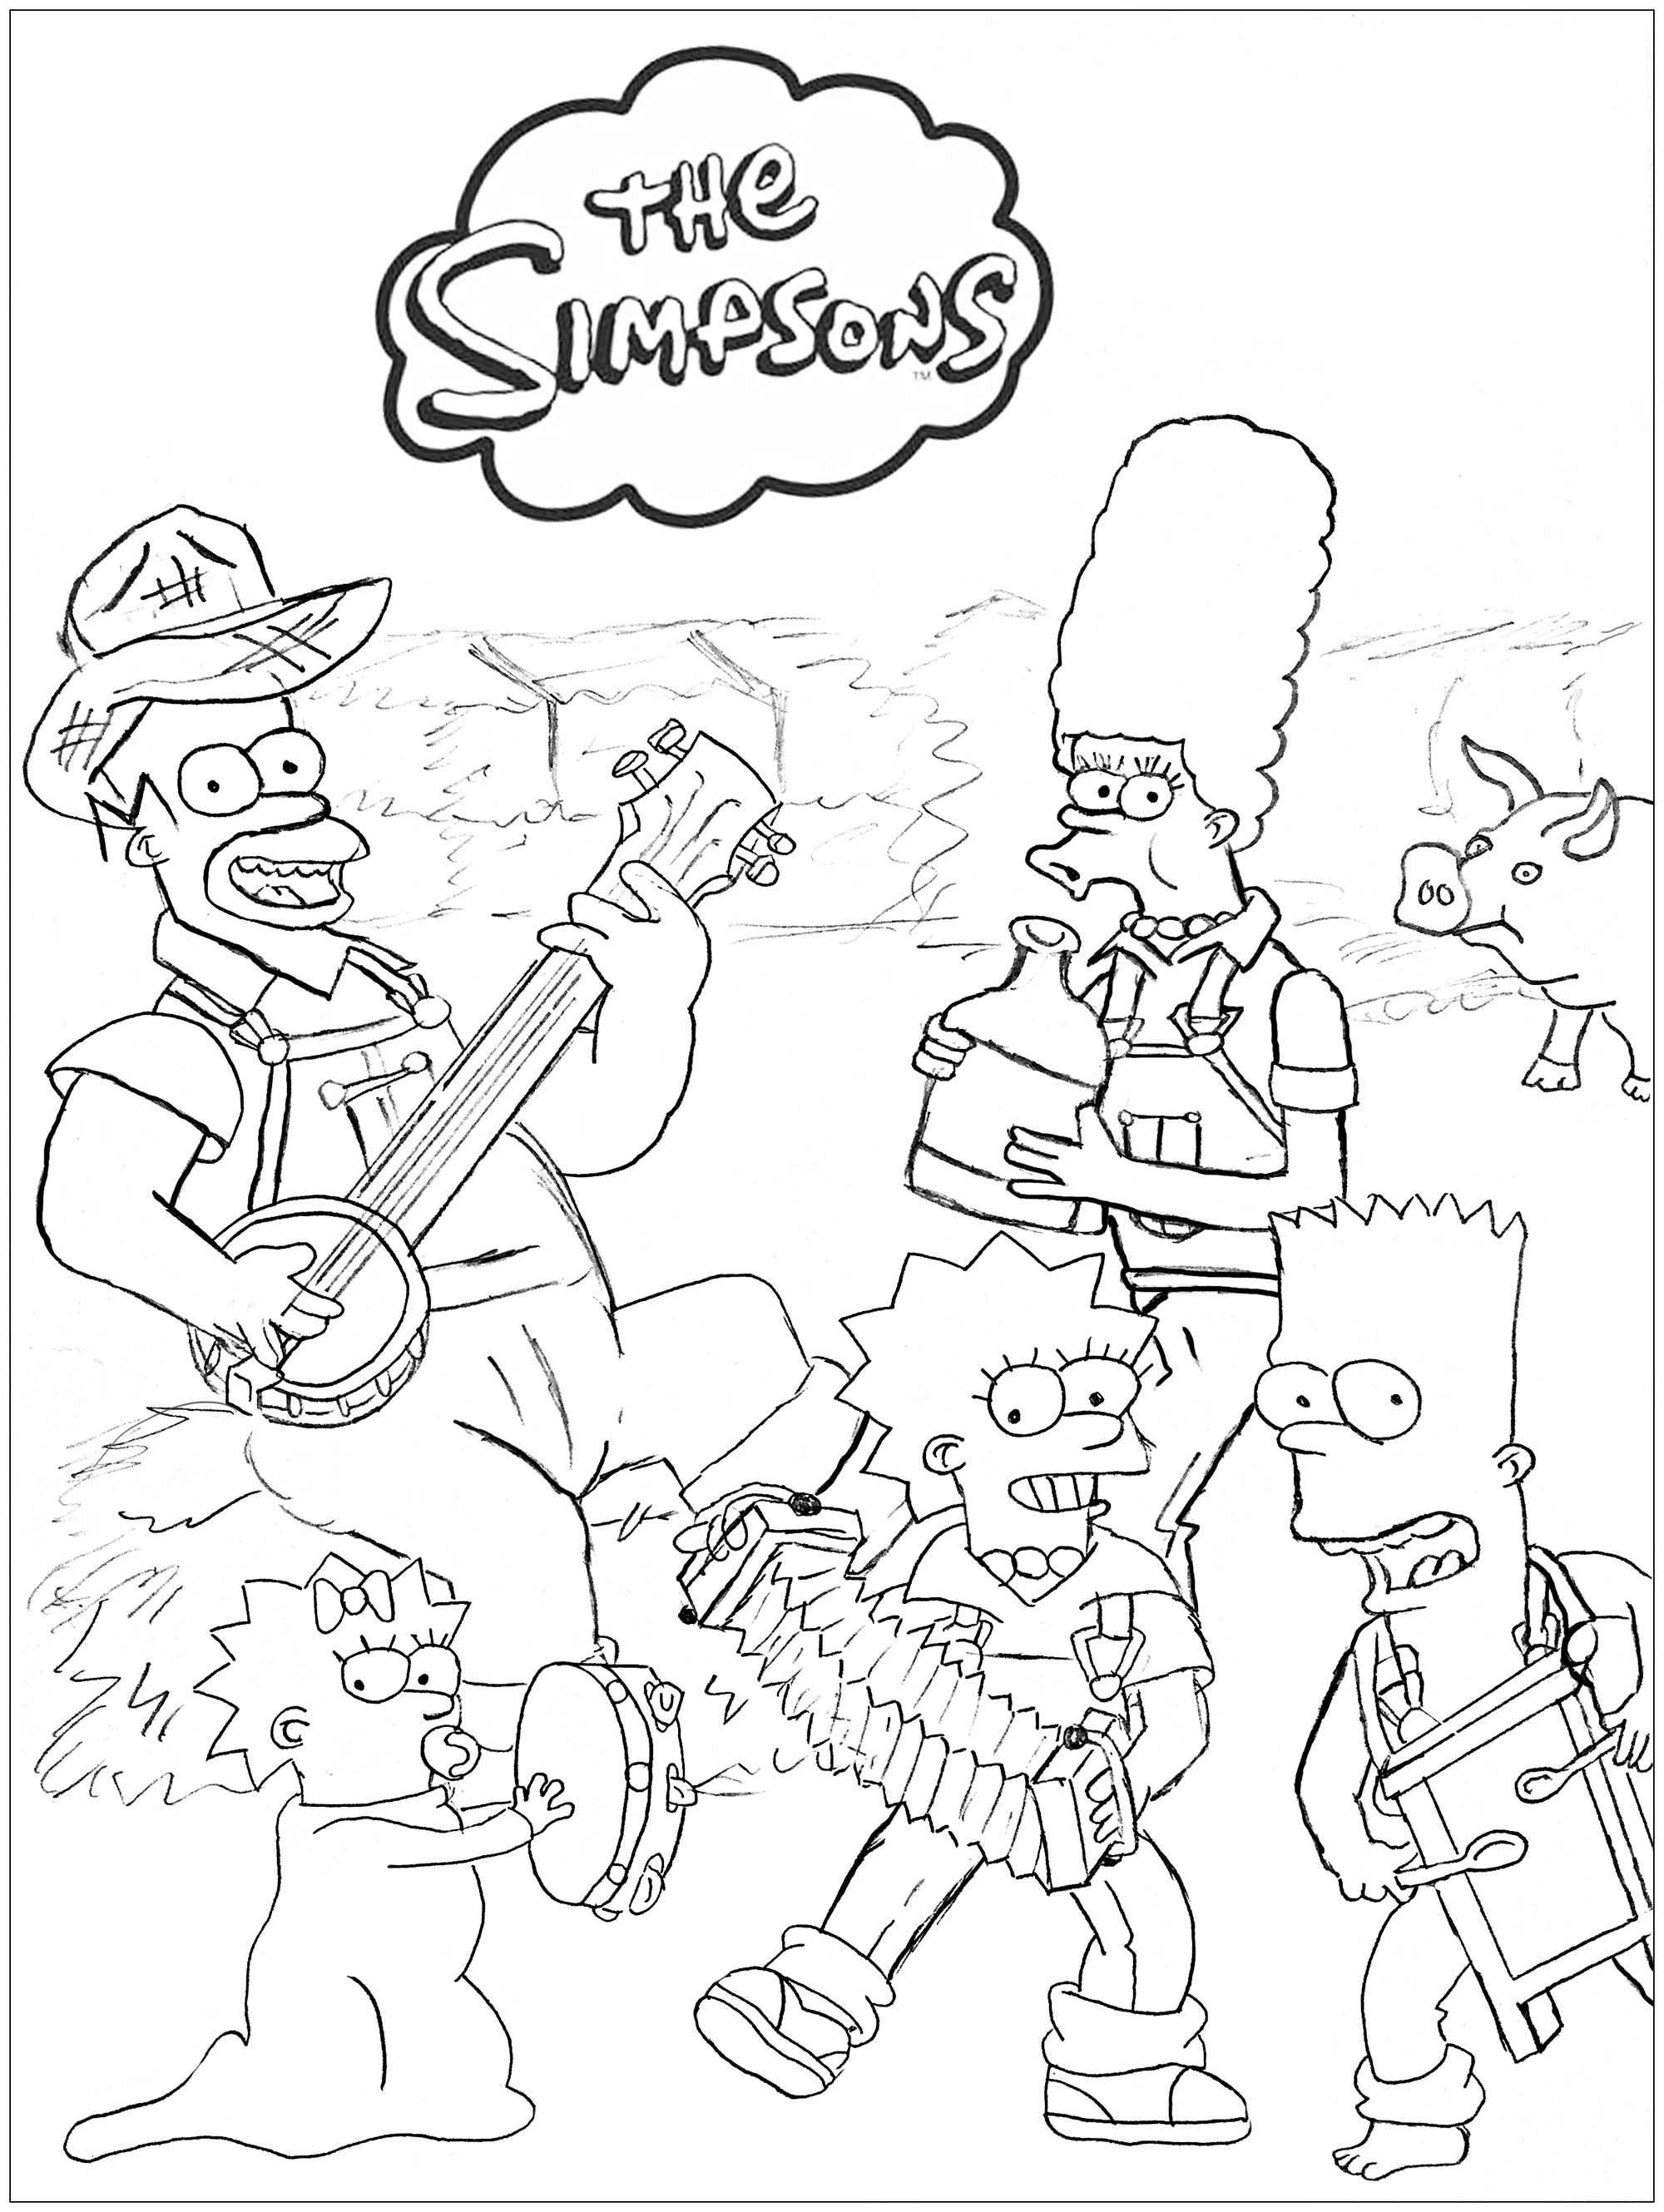 Simpsons Coloring Pages To Print Simpsons Coloring Pages To Print Out ...